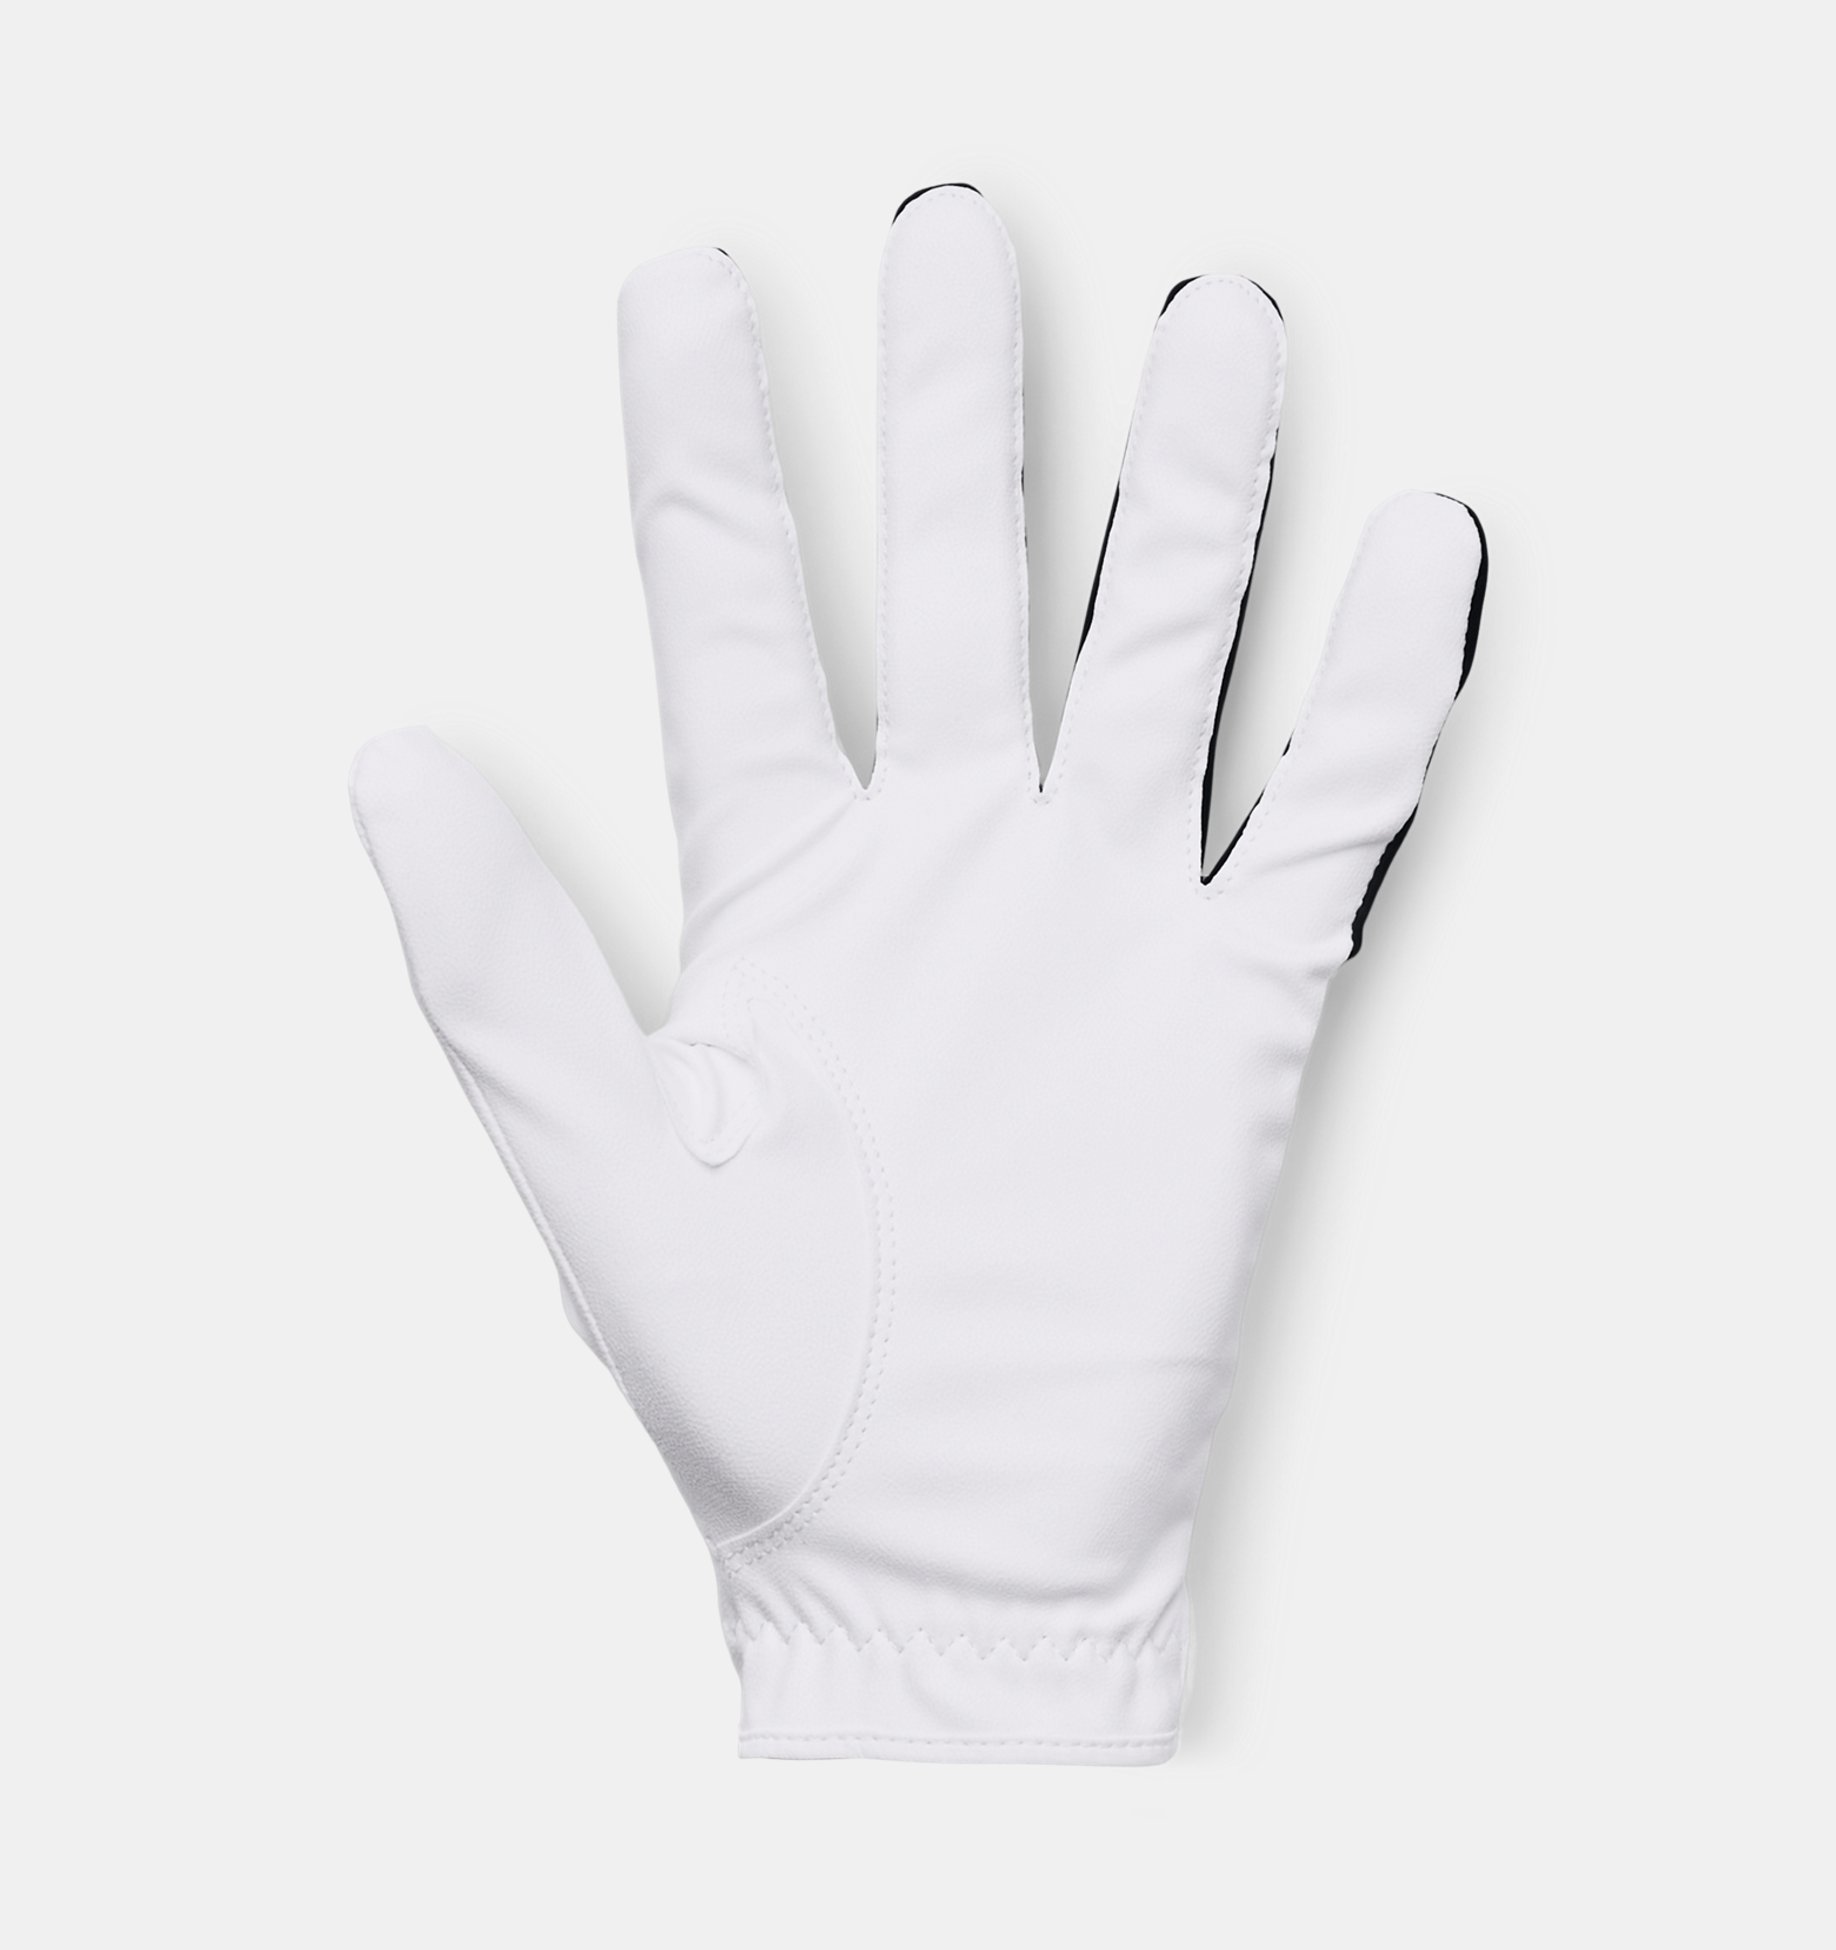 Under Armour Medal Golf Gloves White/grey Extra Lge for Men Save 50% Mens Accessories Gloves 